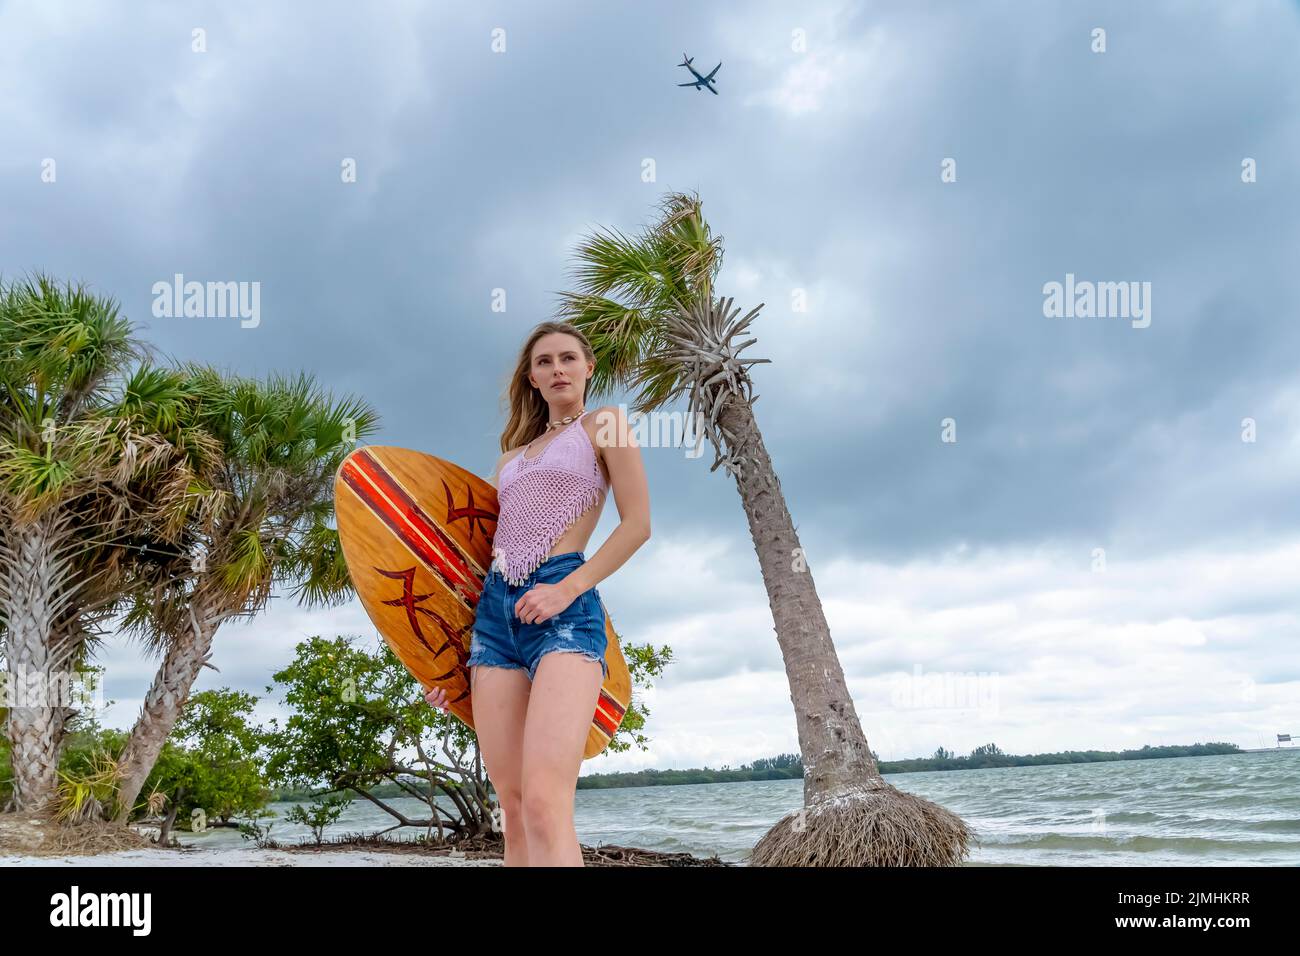 Lovely Blonde Model Enjoying A Summers Day While Preparing To Surf On The Ocean With Her Boogie Board Stock Photo